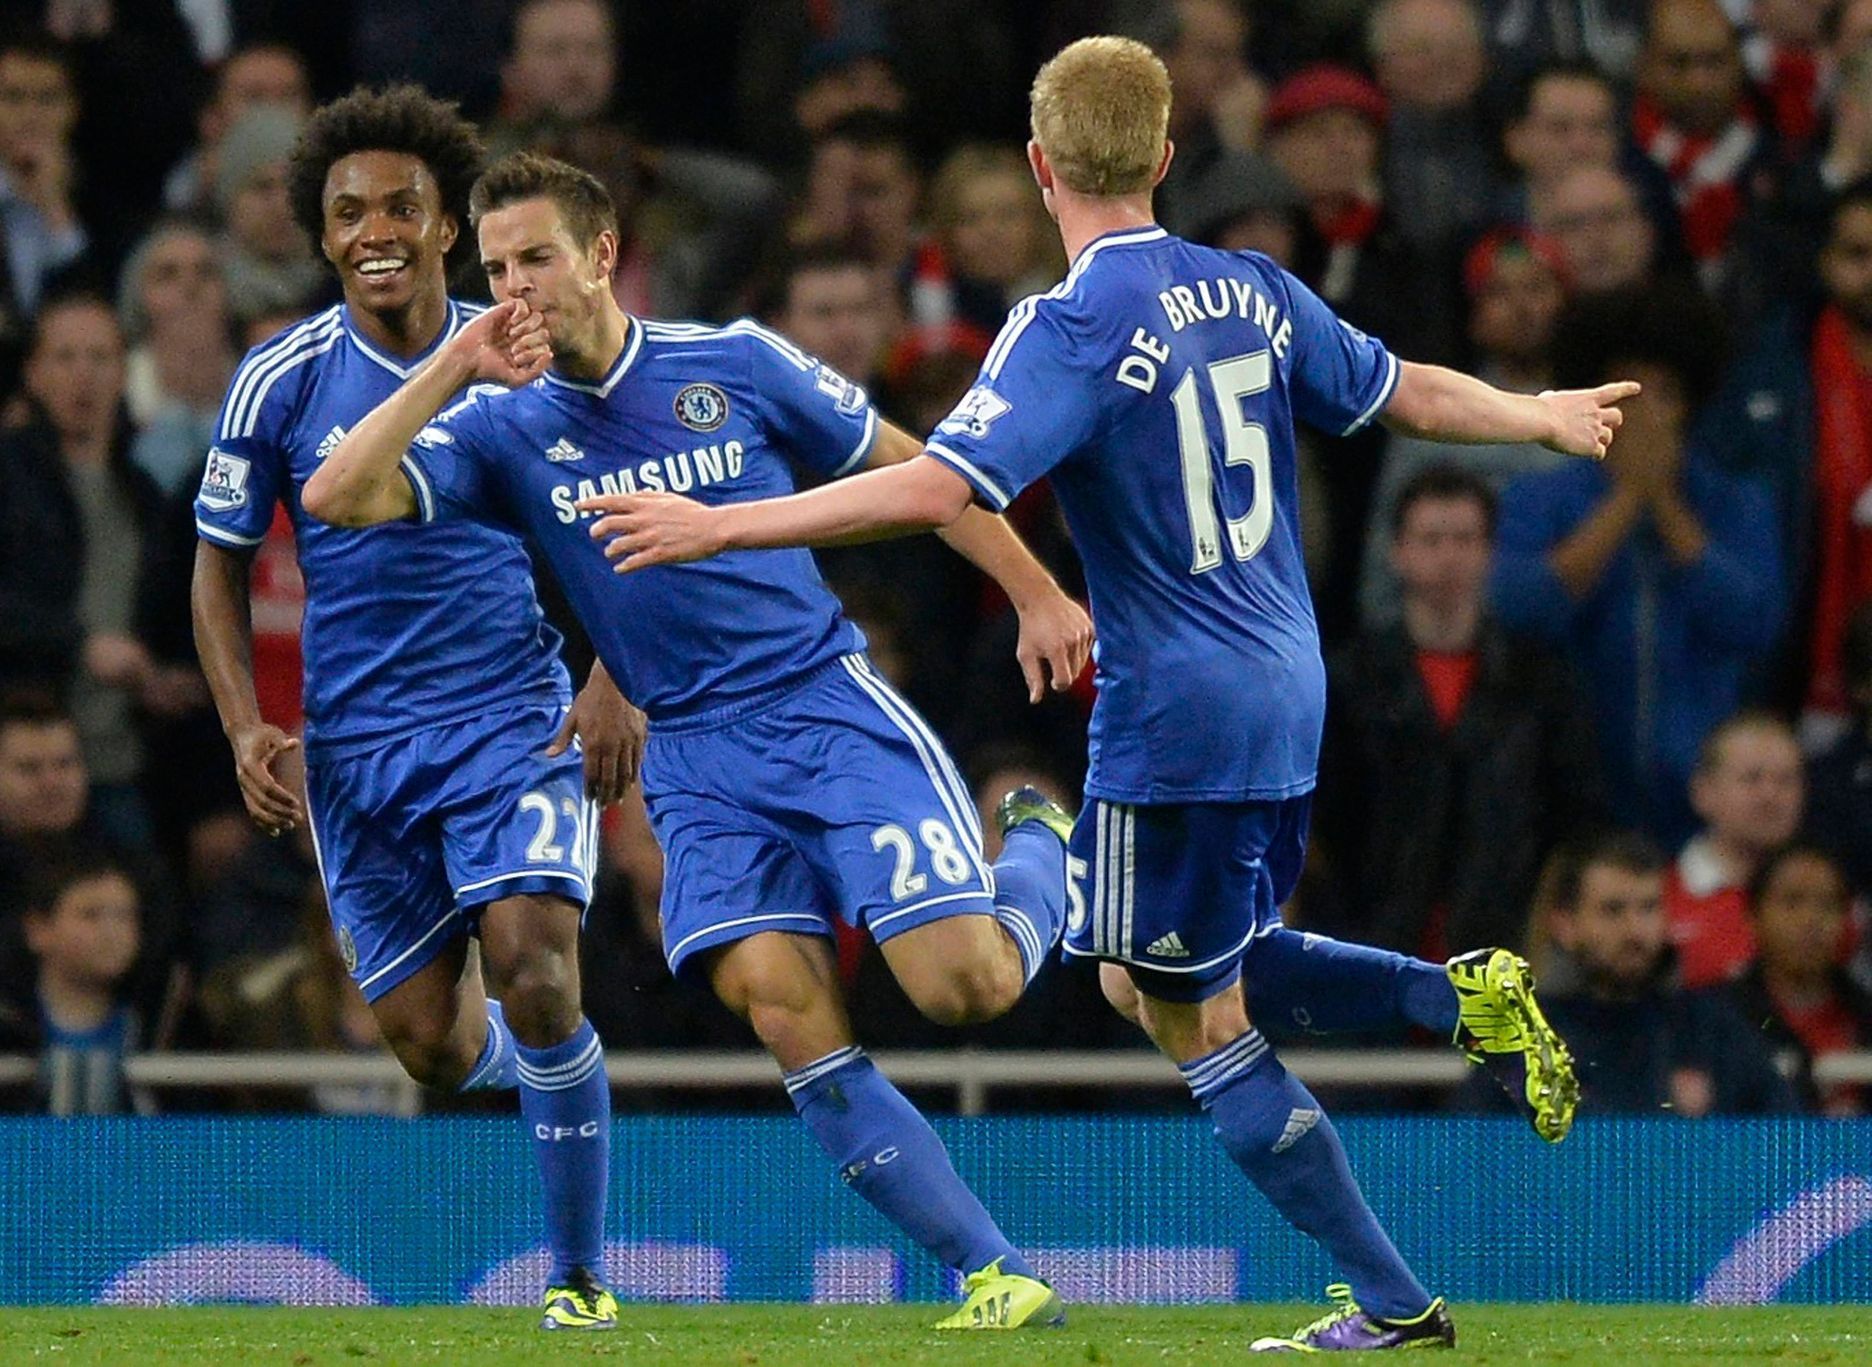 Chelsea's Azpilicueta celebrates scoring with Willian  and De Bruyne during their English League Cup fourth round soccer match against Arsenal at Emirates Stadium in London